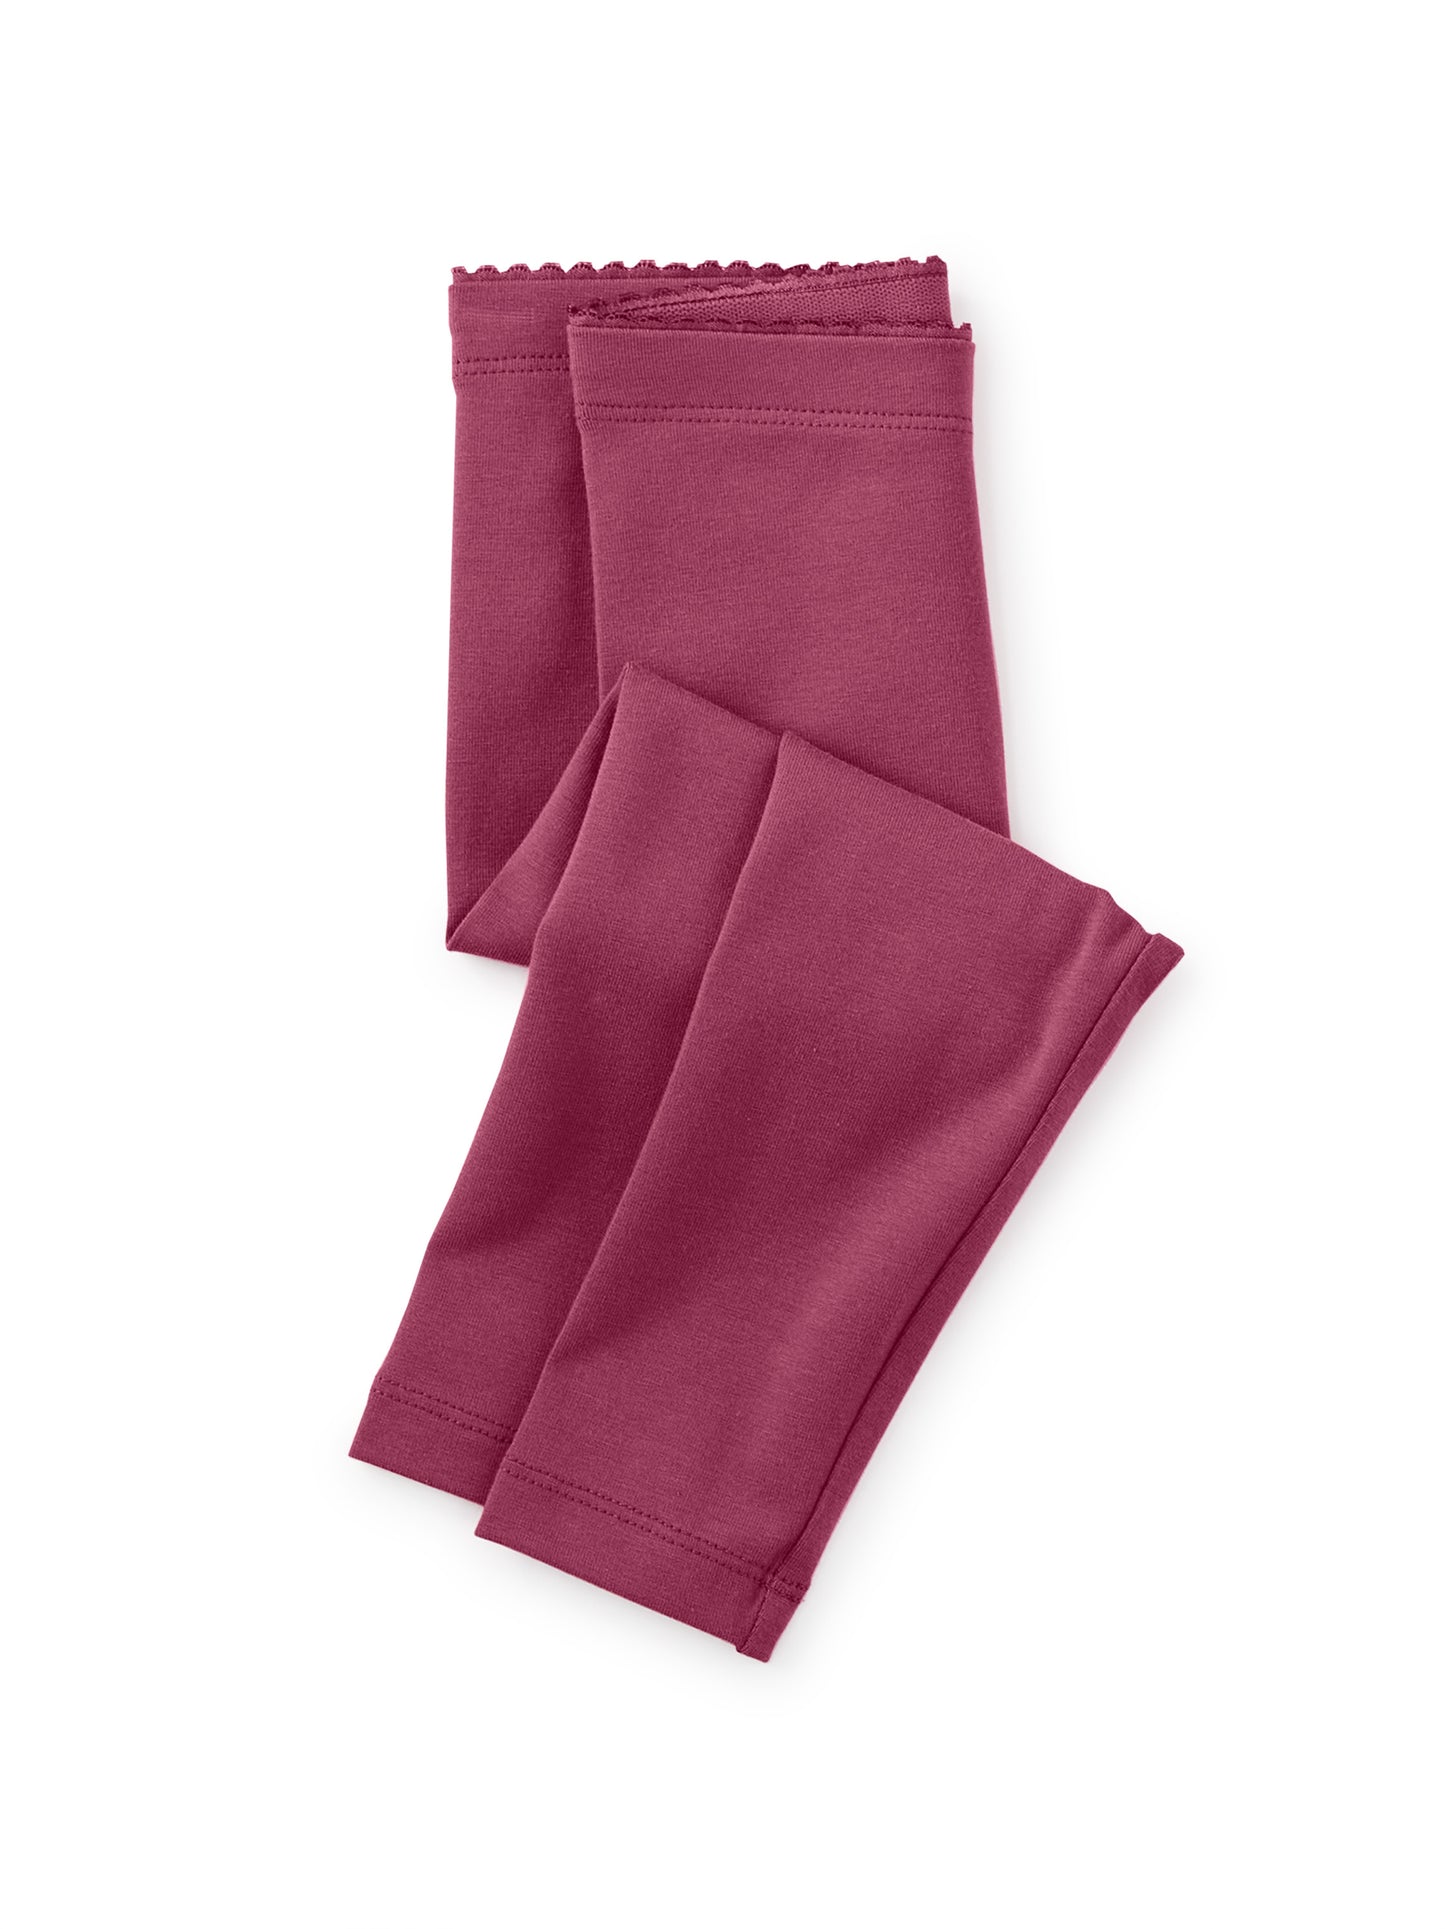 Tea Collection Baby Leggings - Cassis